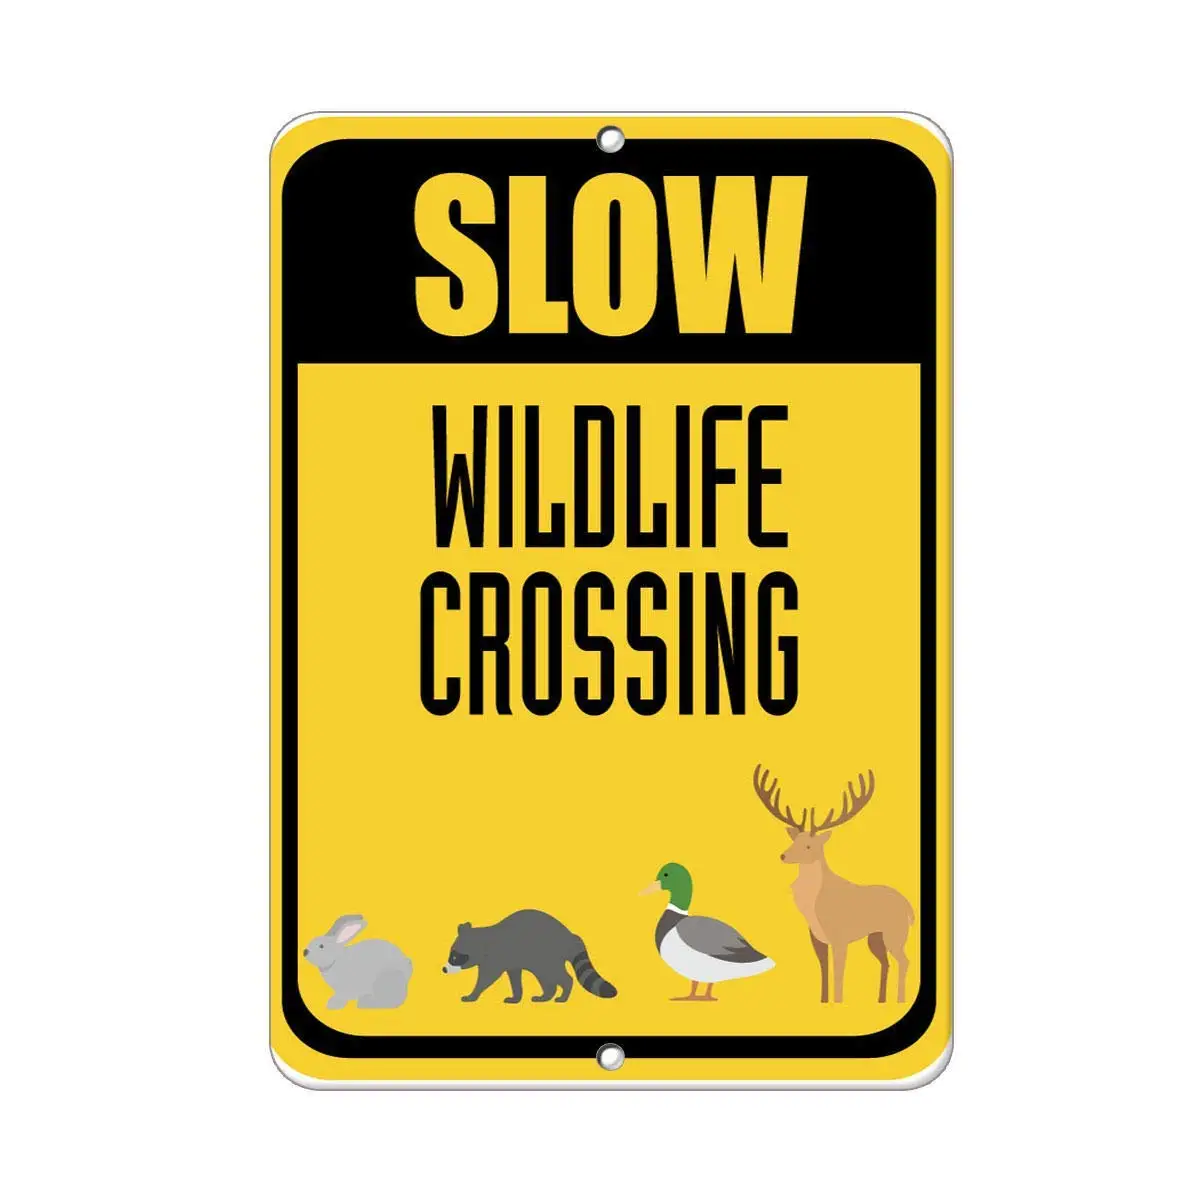 

Guadalupe Ross Metal Slow Wildlife Crossing Traffic Sign Wall Decor Sign 12x8 Inches